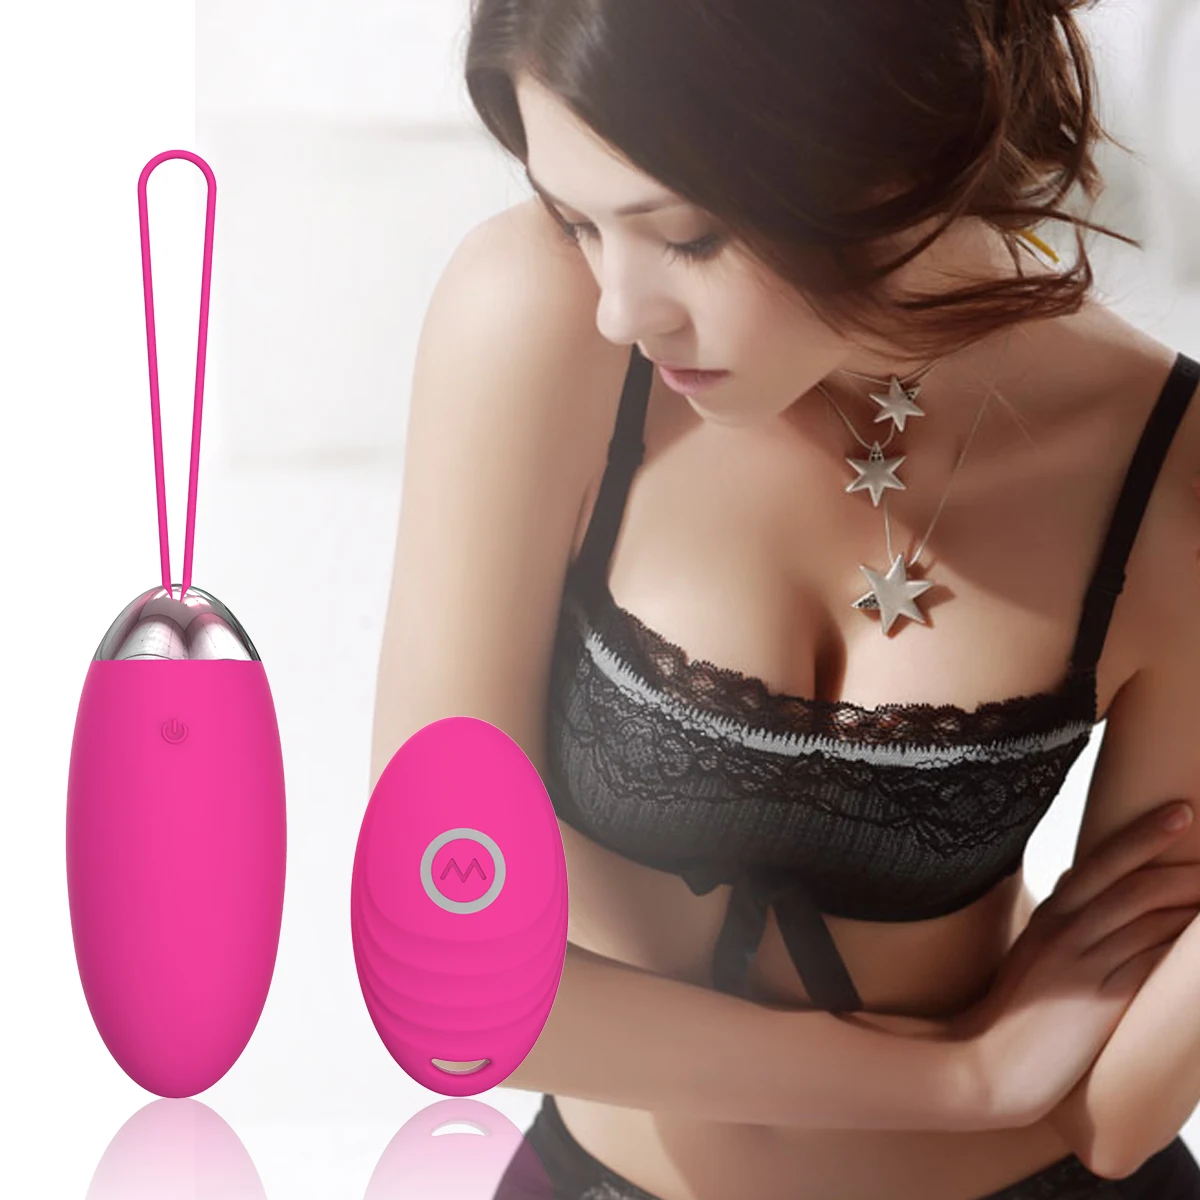 Ylove Vibrator Egg Sex Toy For Woman Wireless Rem